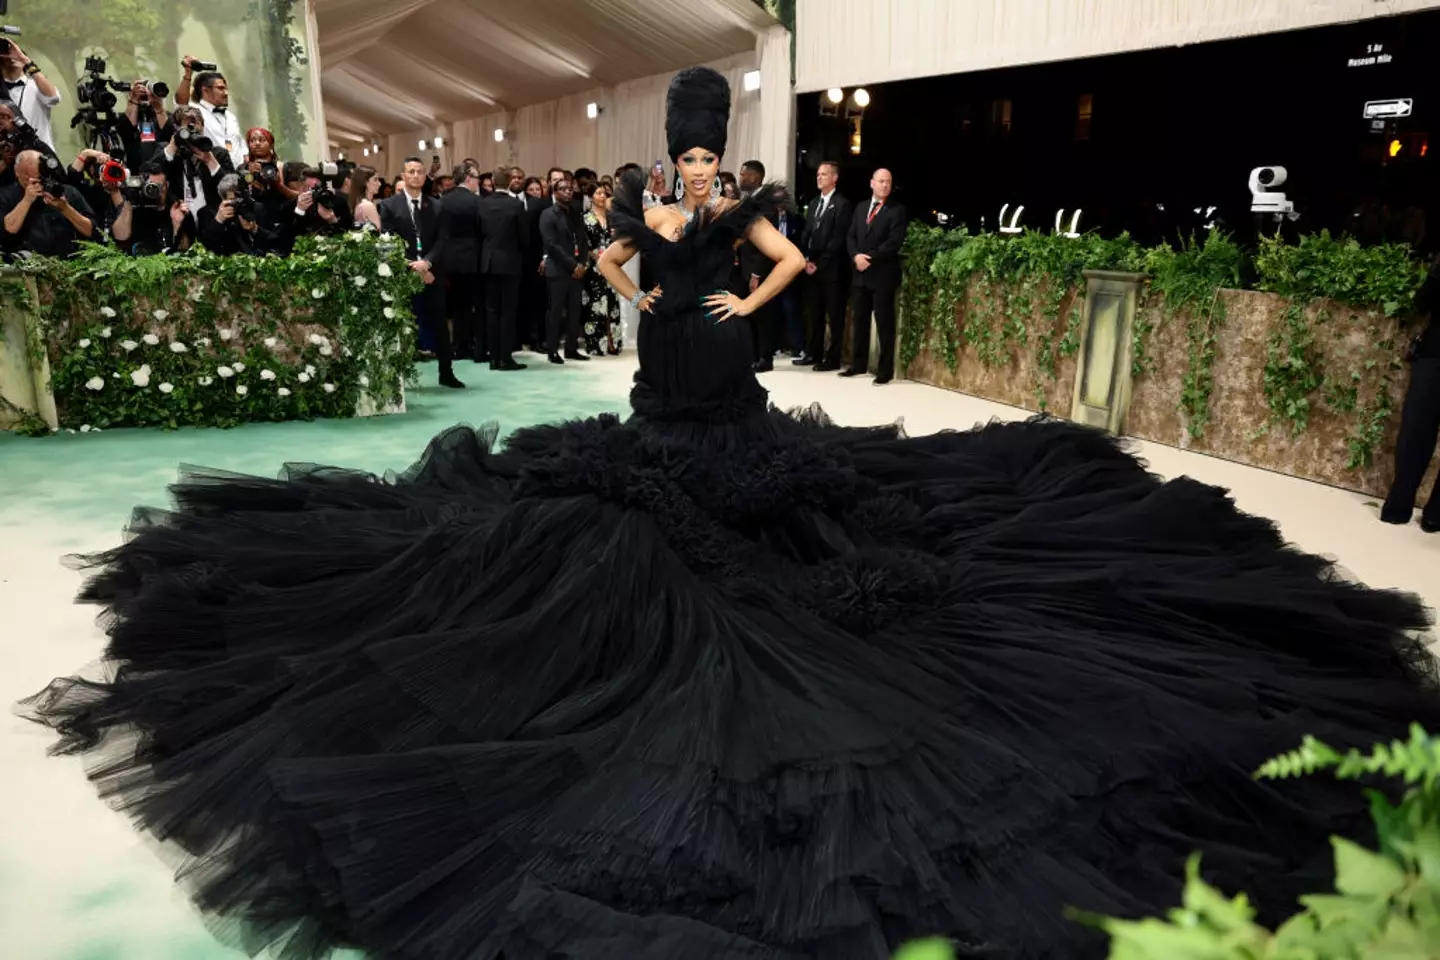 There has been uproar on social media following Cardi B's Met Gala comments. (Dimitrios Kambouris/Getty Images for The Met Museum/Vogue)